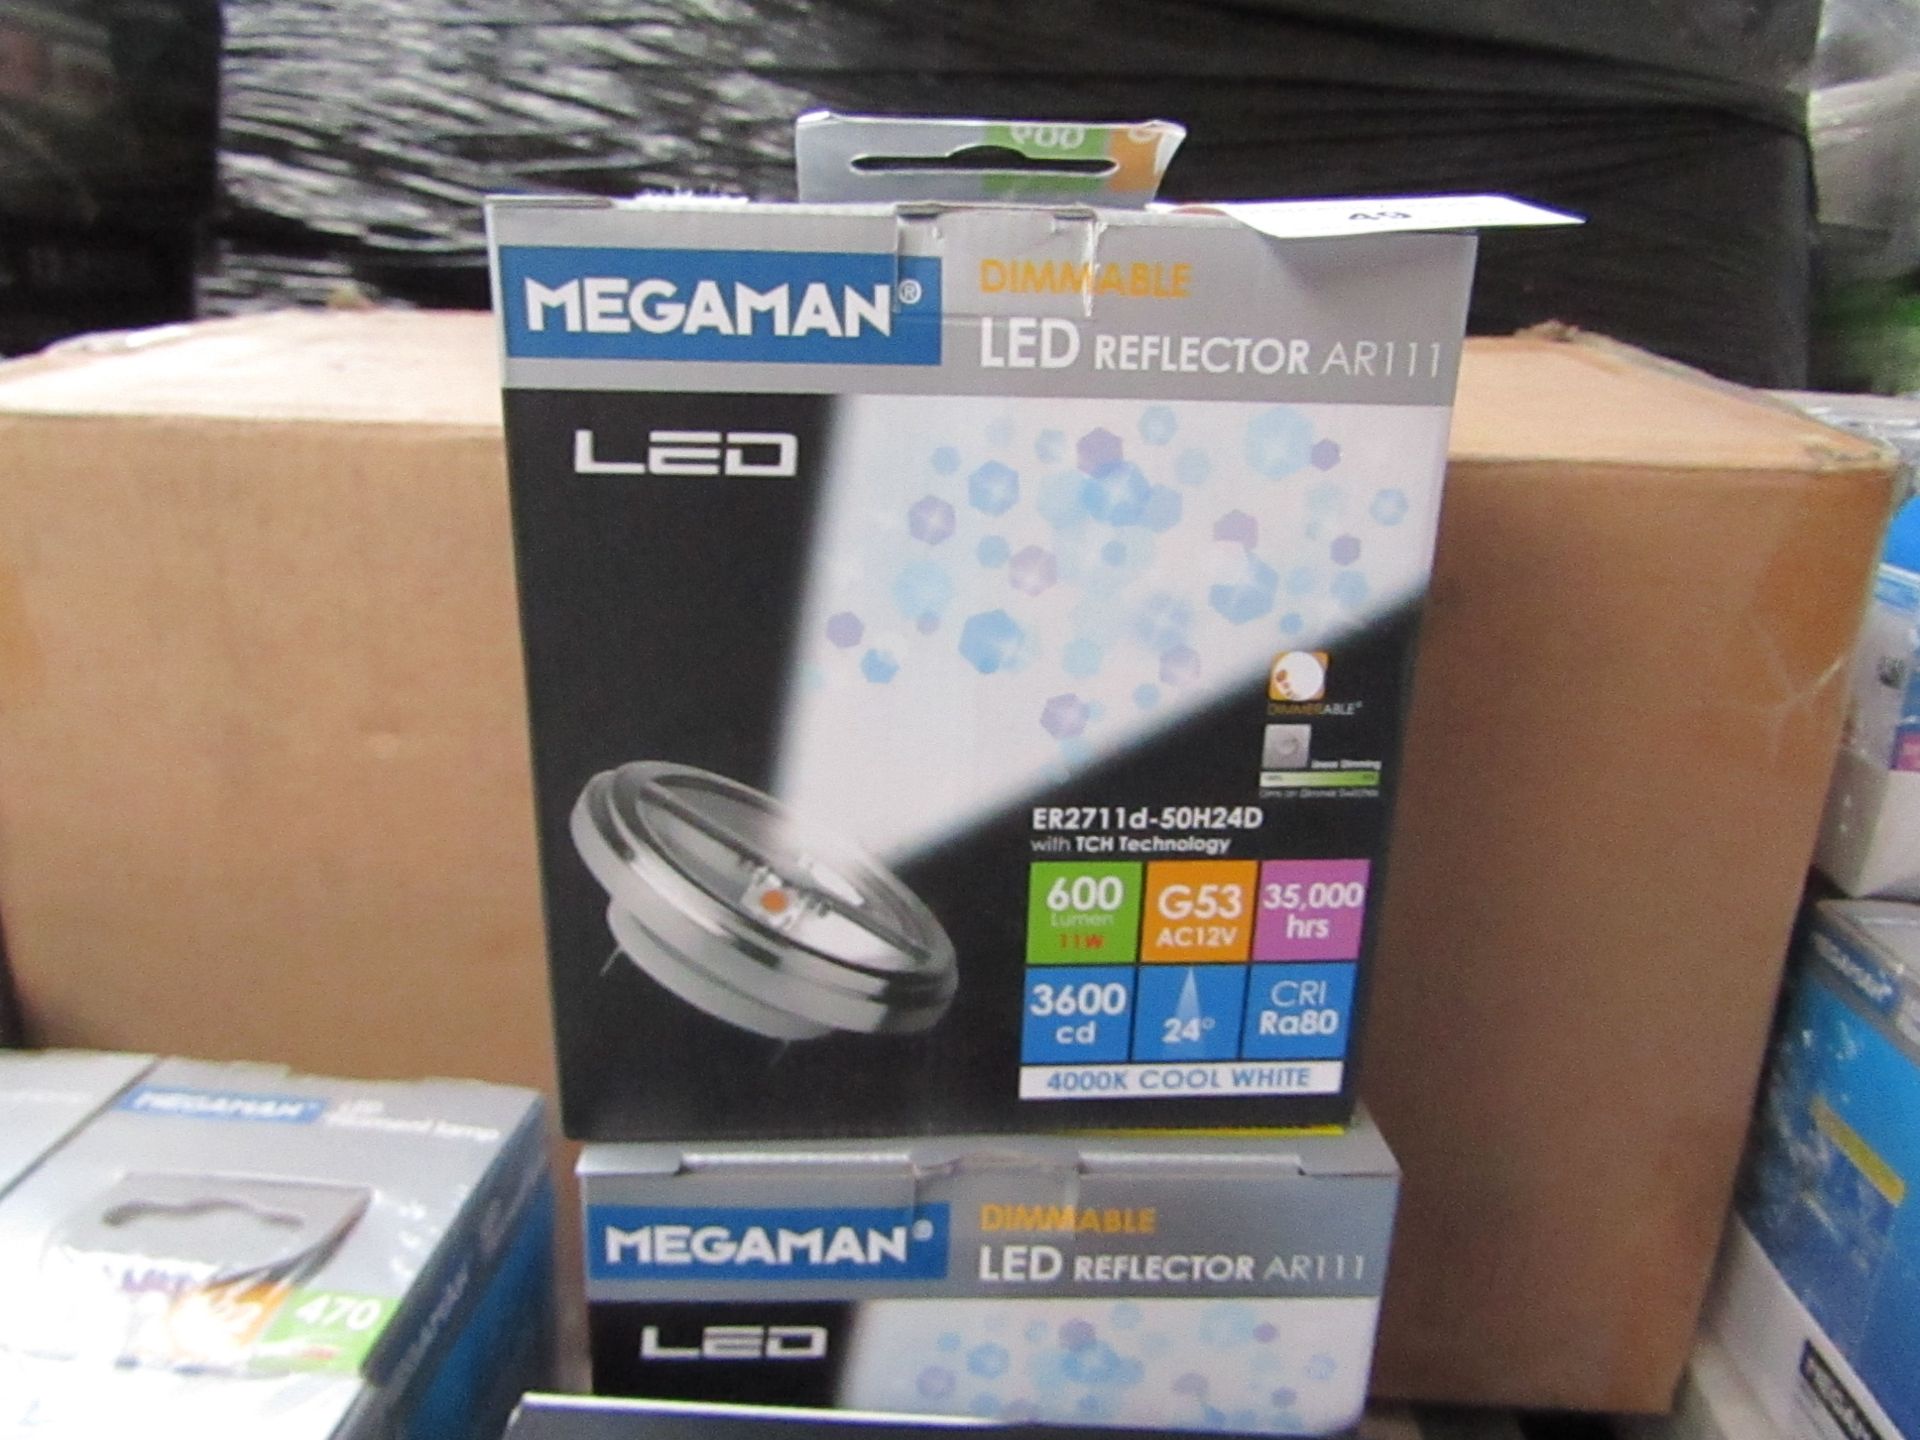 1x Mega Man LED Dimmable Reflector lamp, New and Boxed. 35,000 Hrs / G53 / 600 Lumens